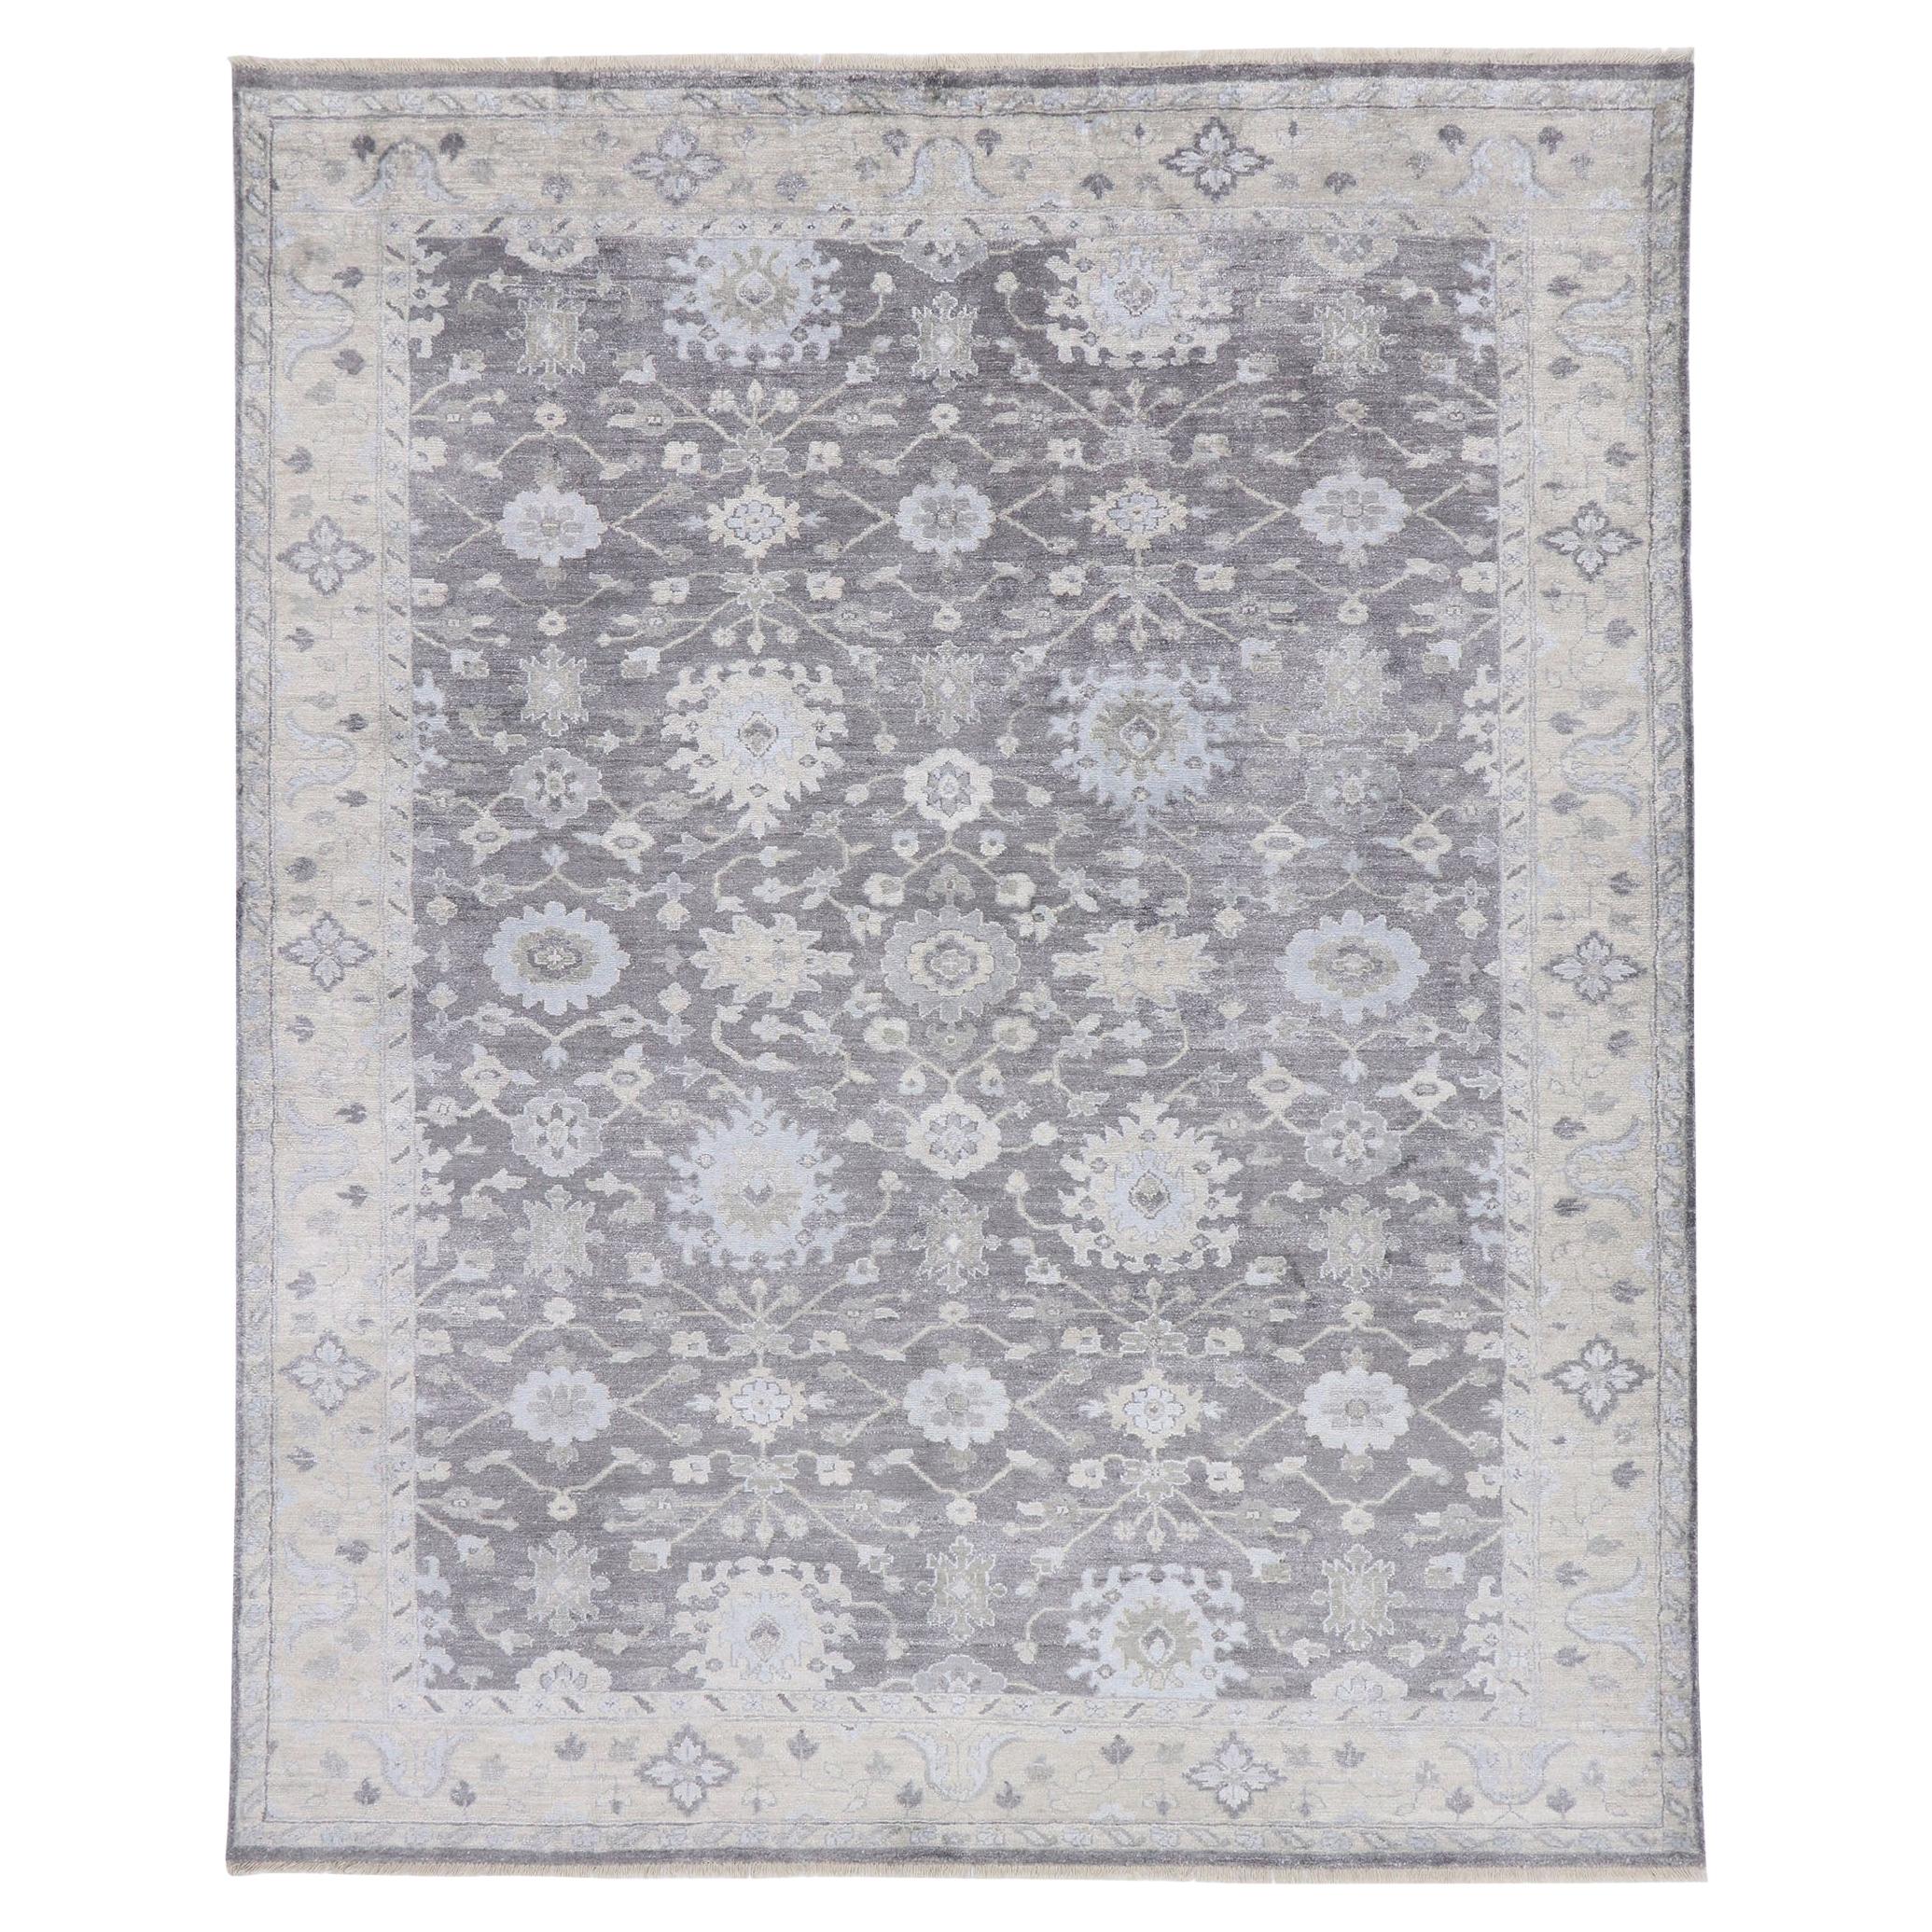 New Contemporary Oushak Style Rug With, Area Rug Contemporary Design